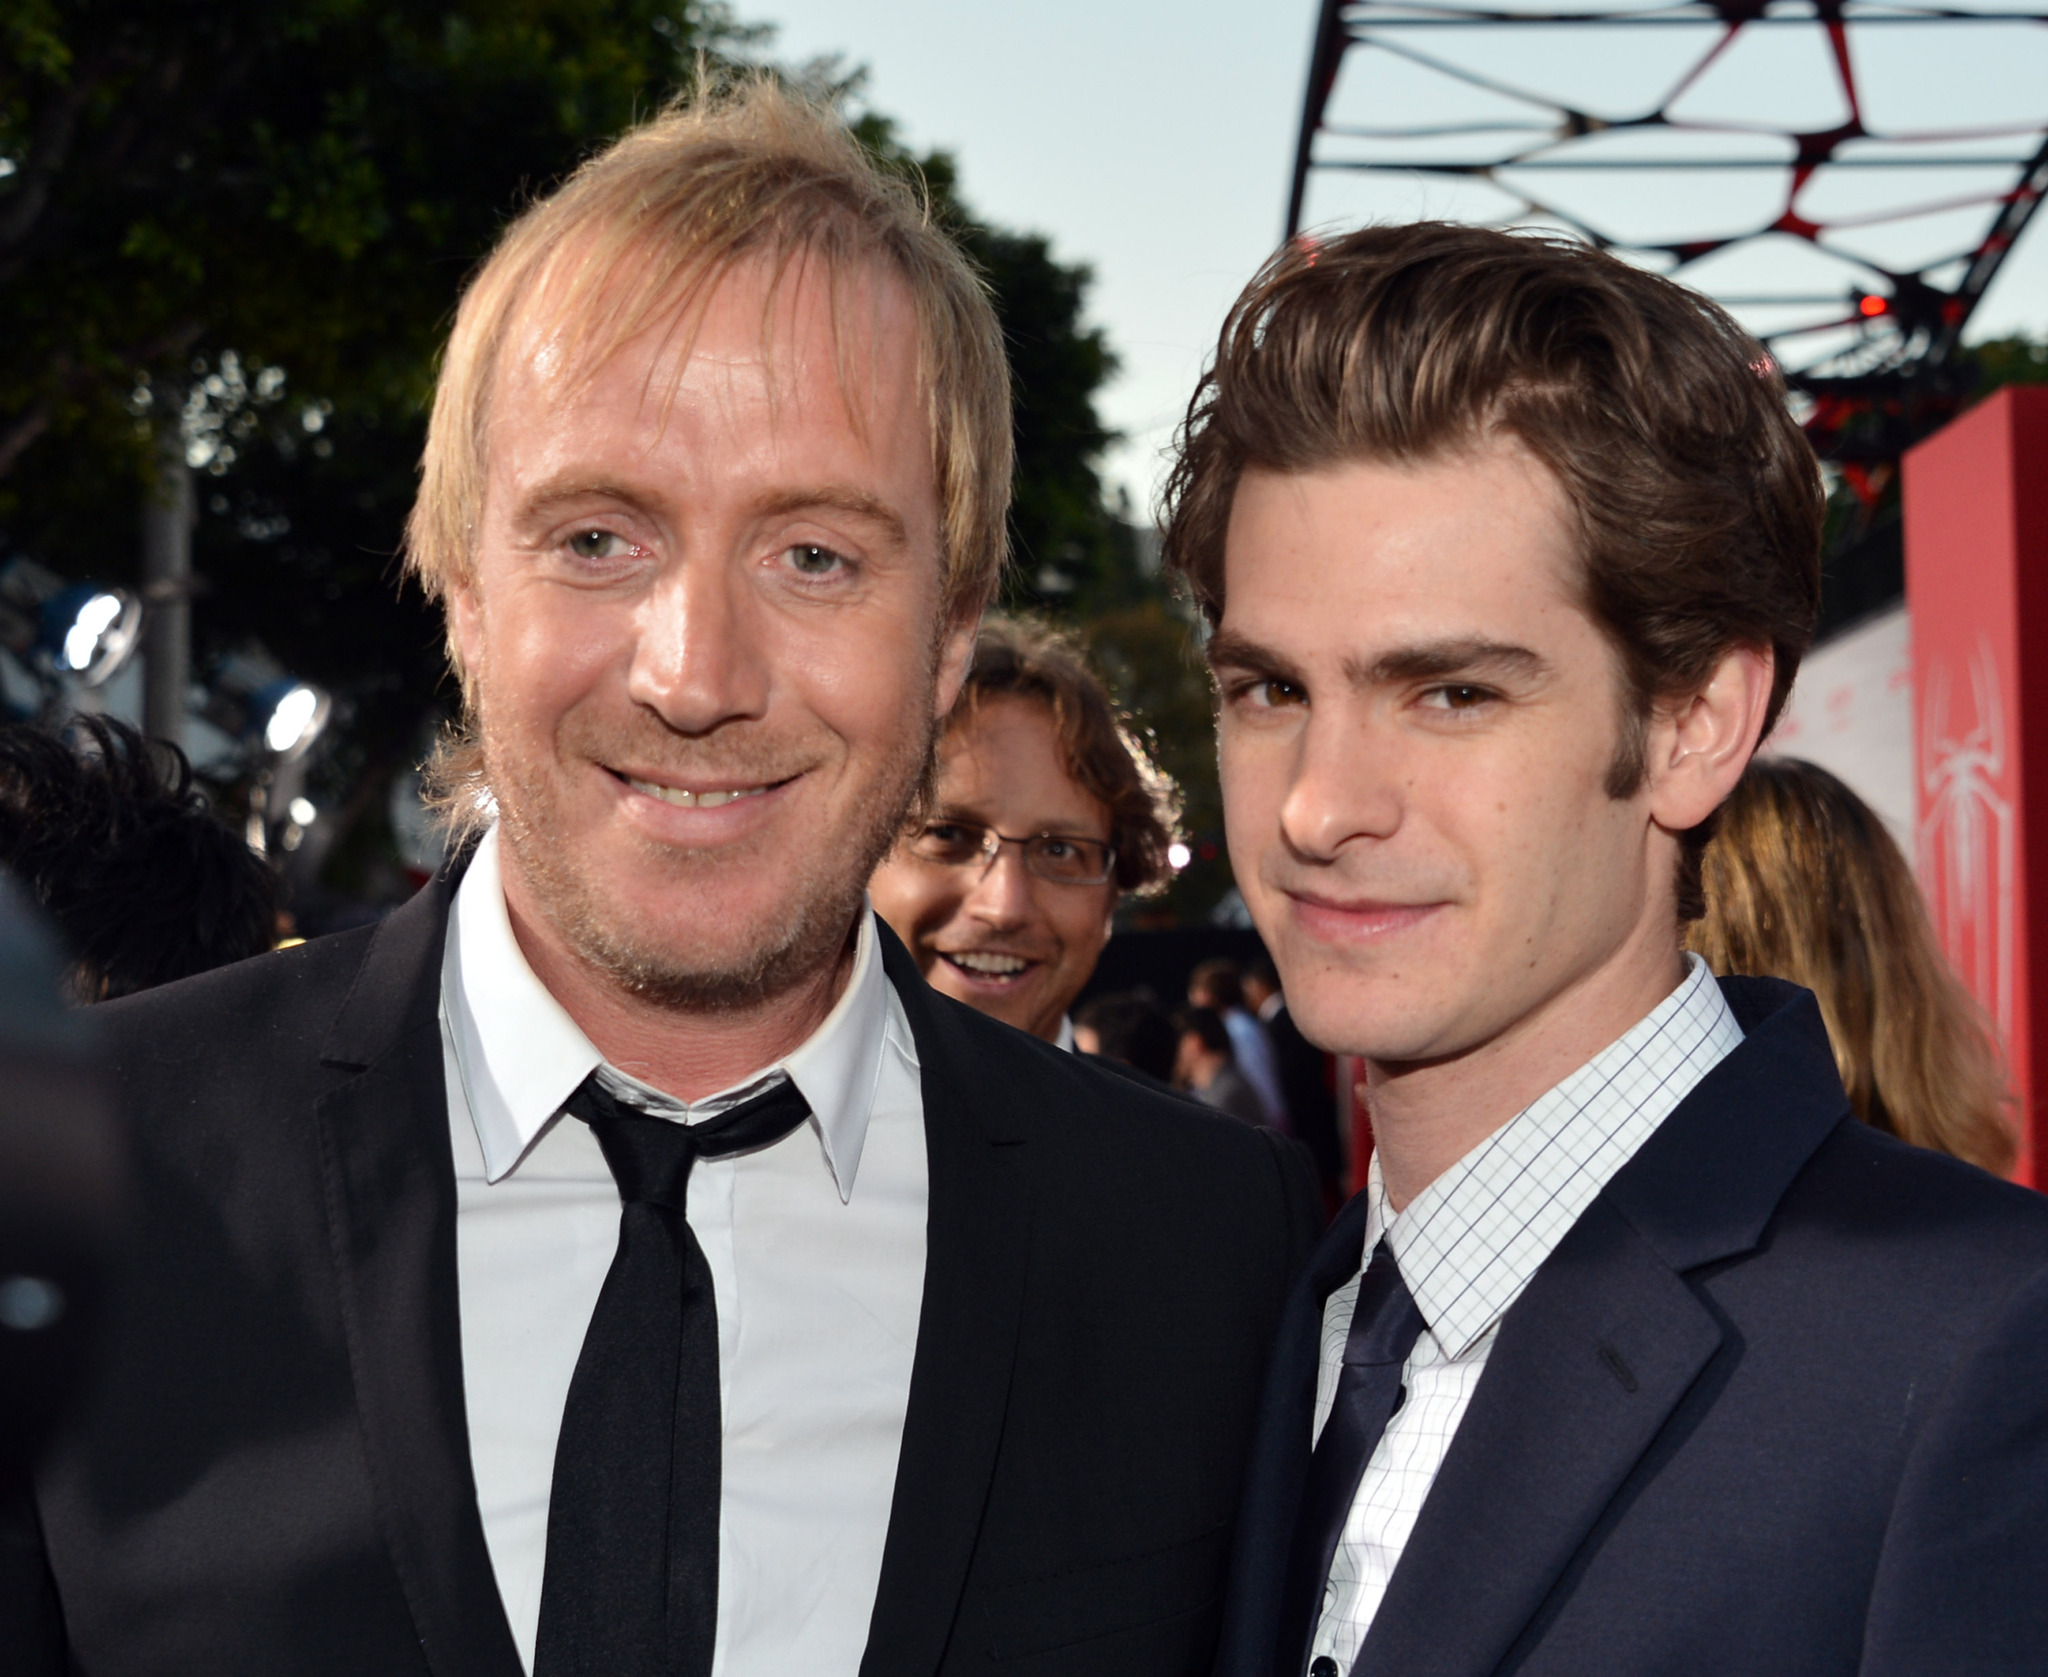 Rhys Ifans and Andrew Garfield at event of Nepaprastas Zmogus-Voras (2012)